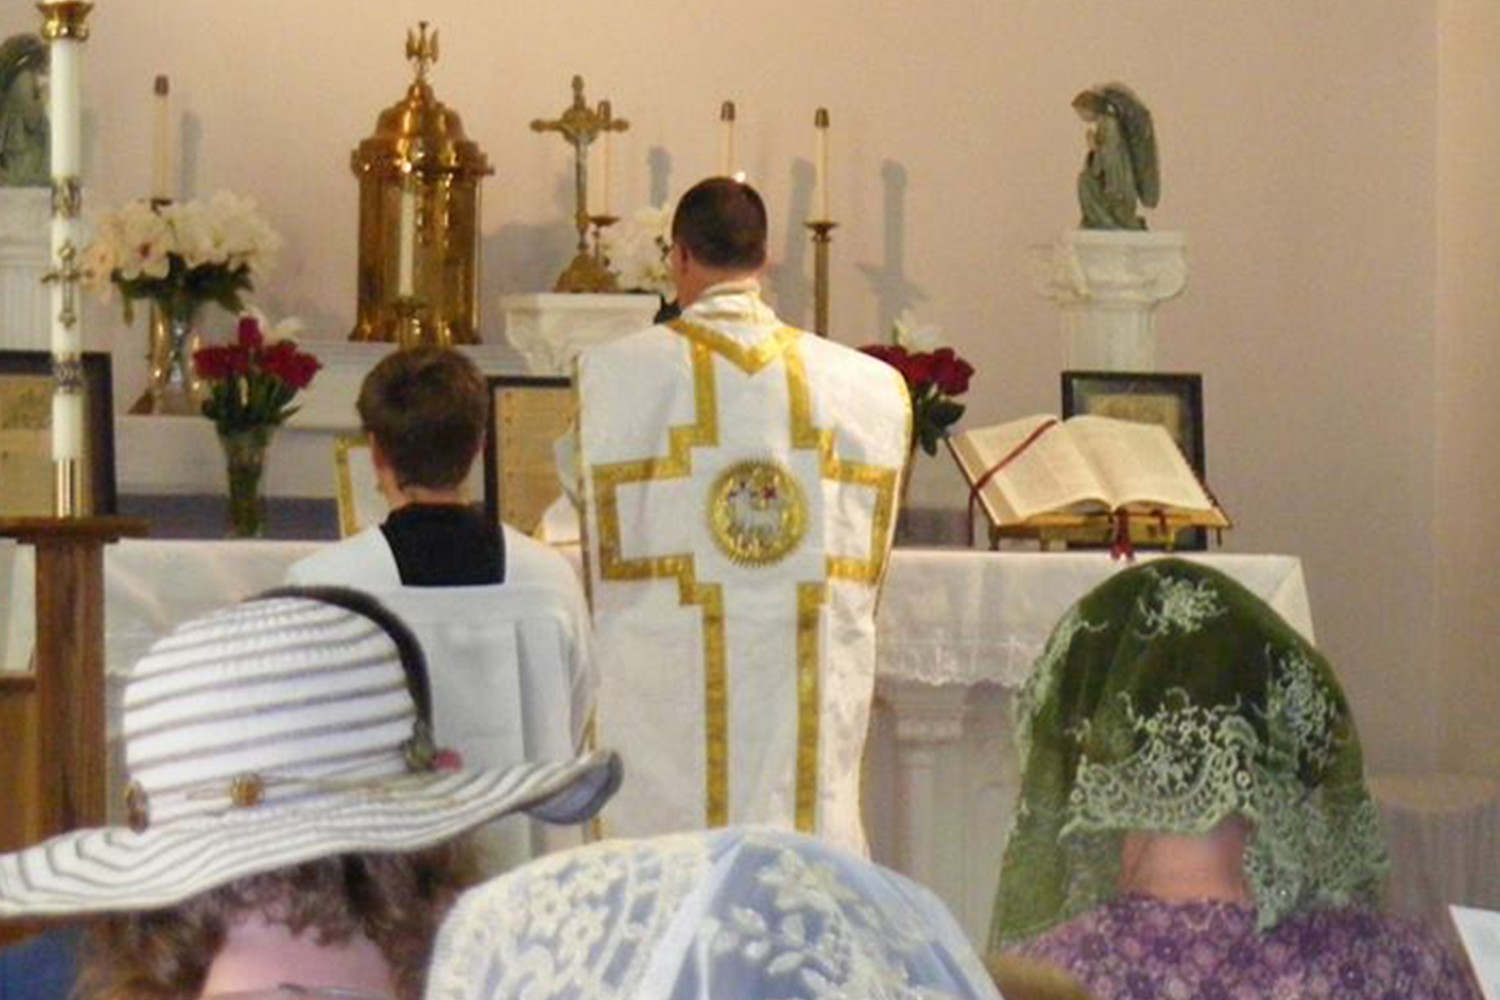 Father Kevin Drew, a priest of the Diocese of Kansas City-St. Joseph, offers Mass in the extraordinary form in Latin on May 6 in St. Rose of Lima Church in Novinger.